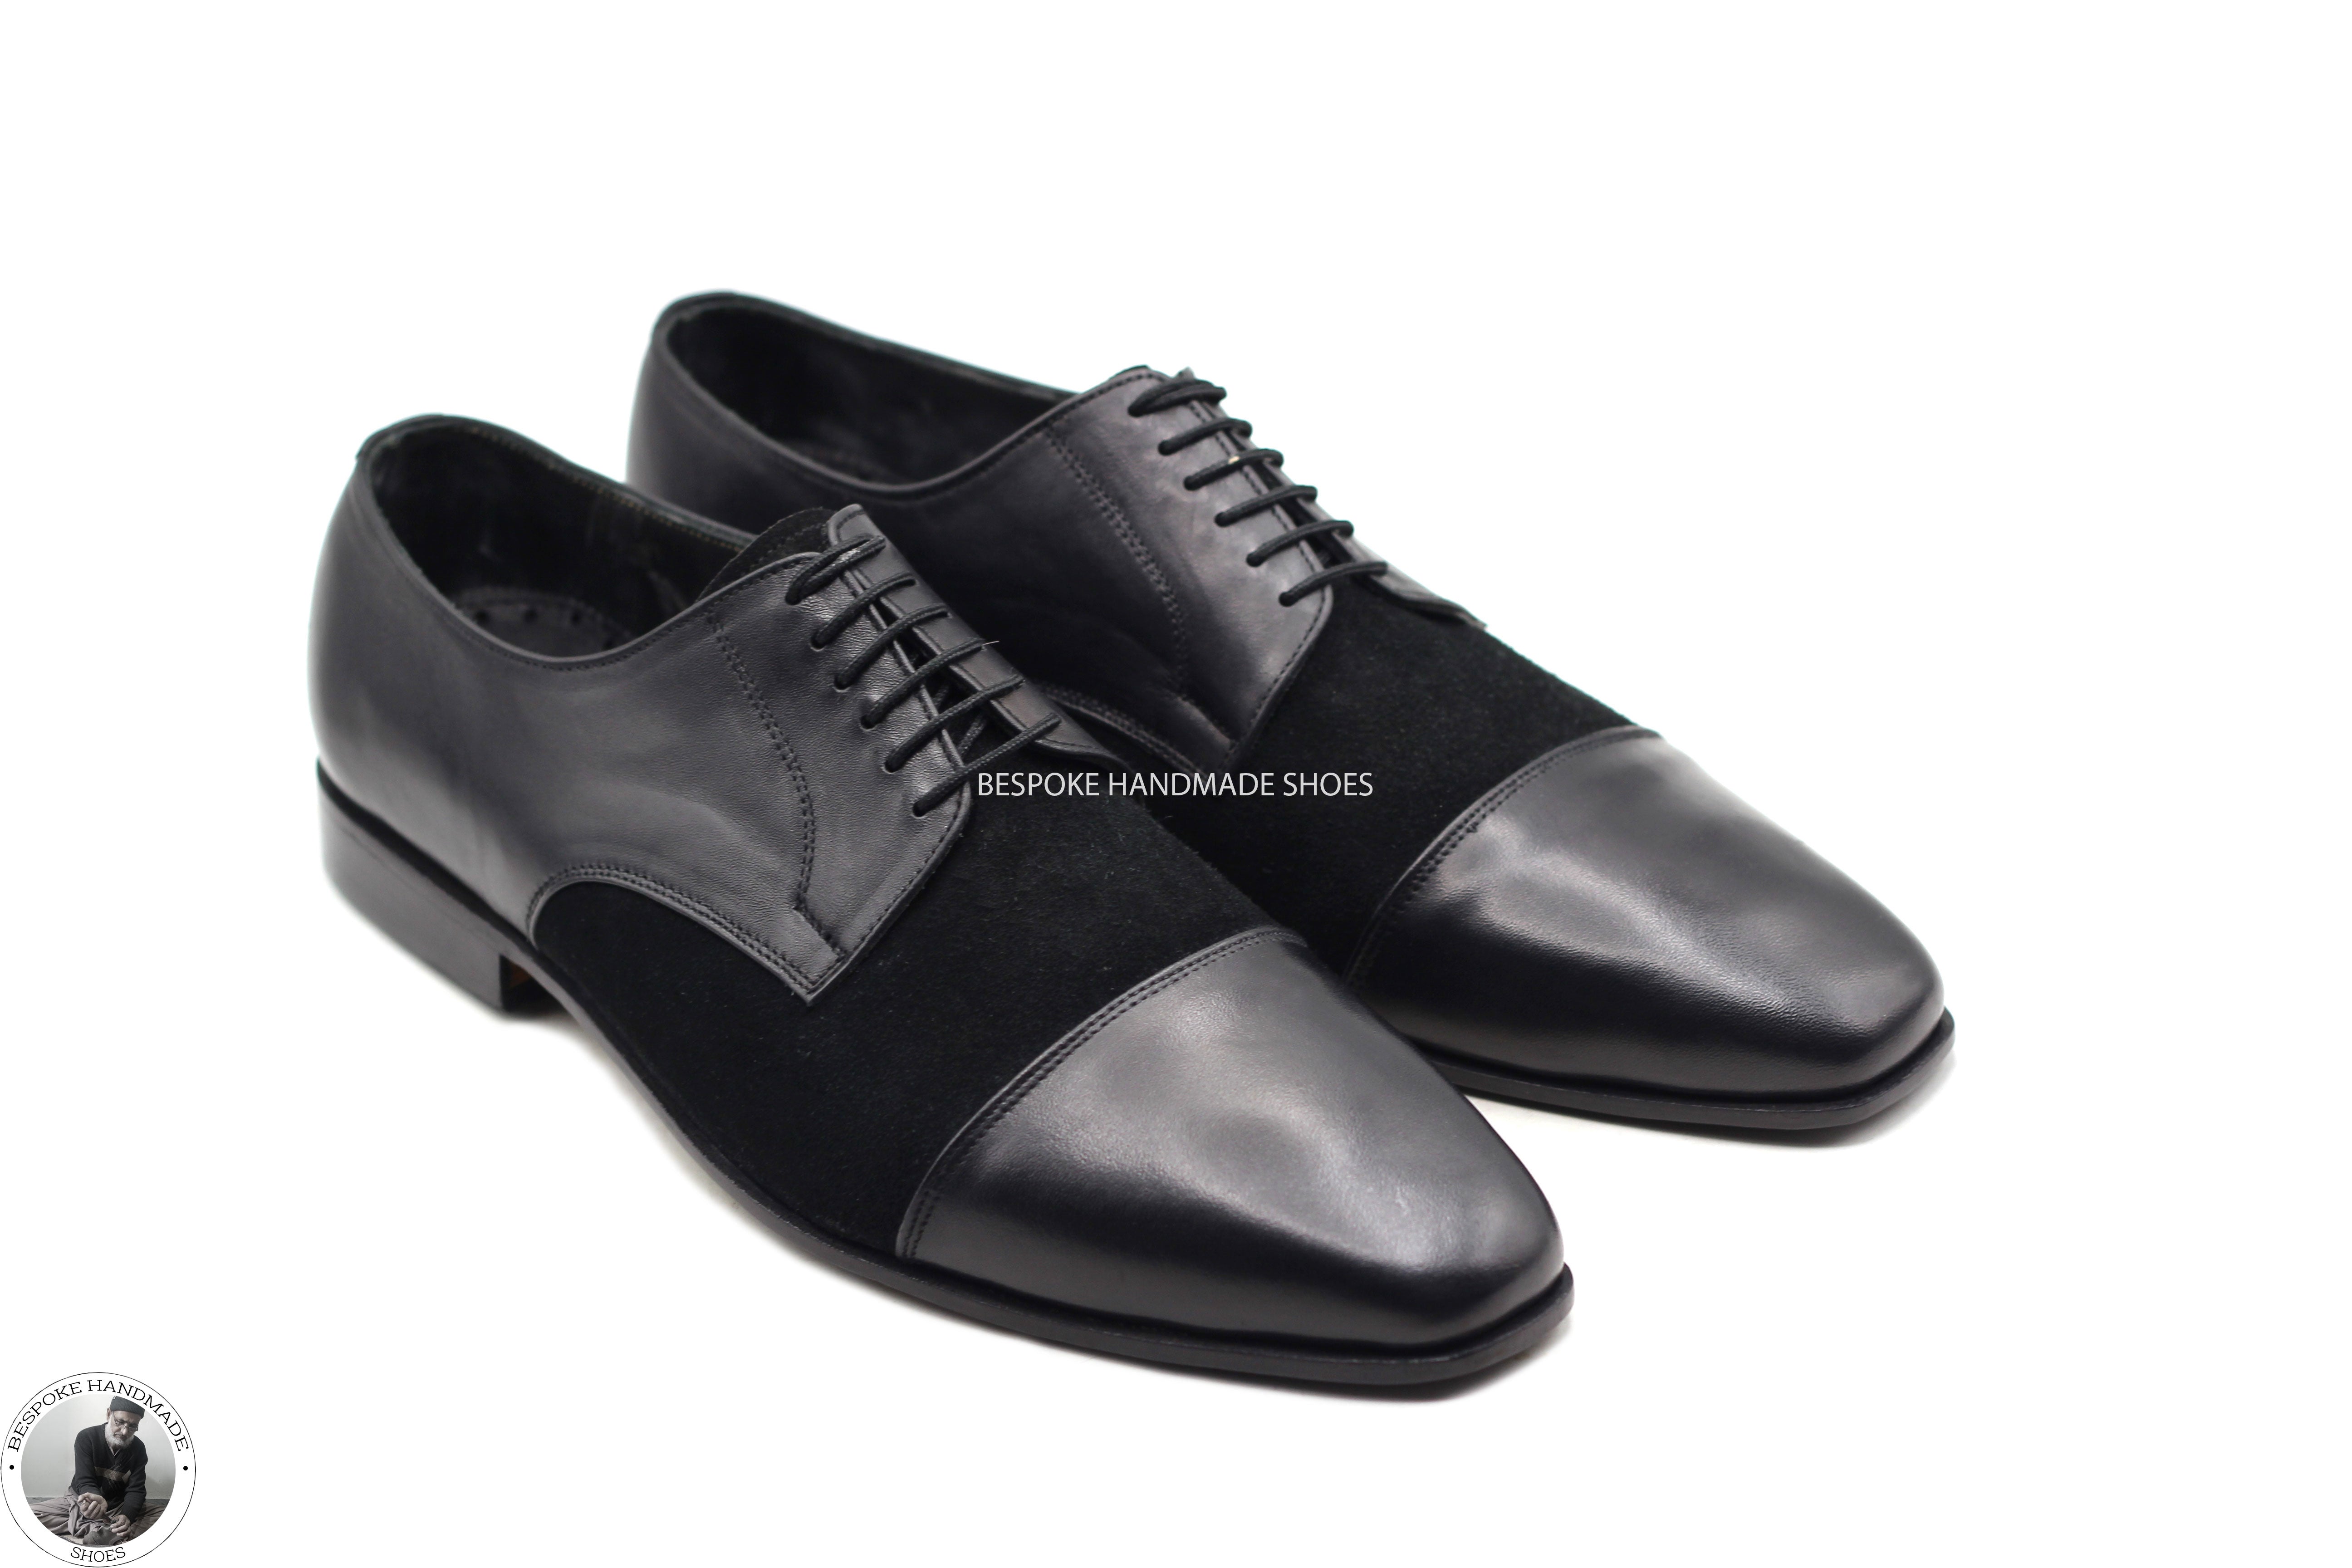 Handcrafted Genuine Black Leather & Suede Toe Cap Whole Cut Lace Up Oxford Party Wear Dress Shoes For Men's